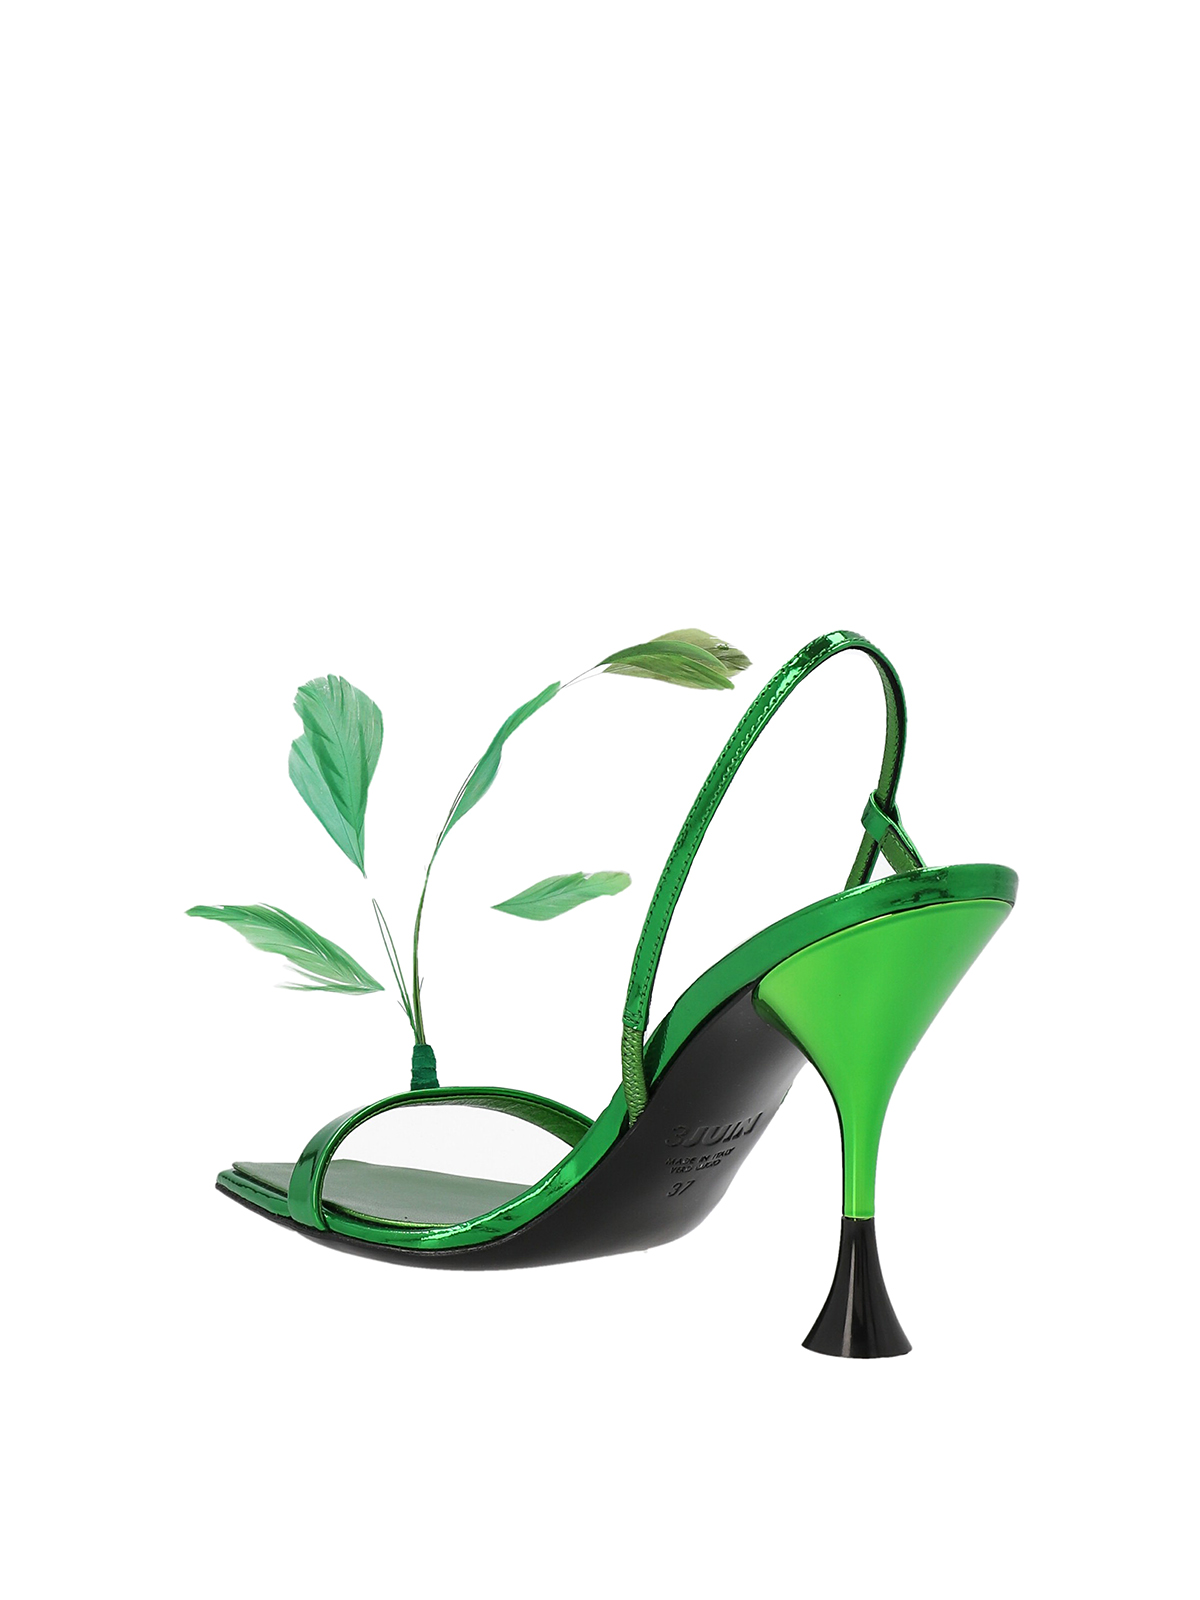 Buy Neon Green Sandals for Girls by D'Chica Online | Ajio.com